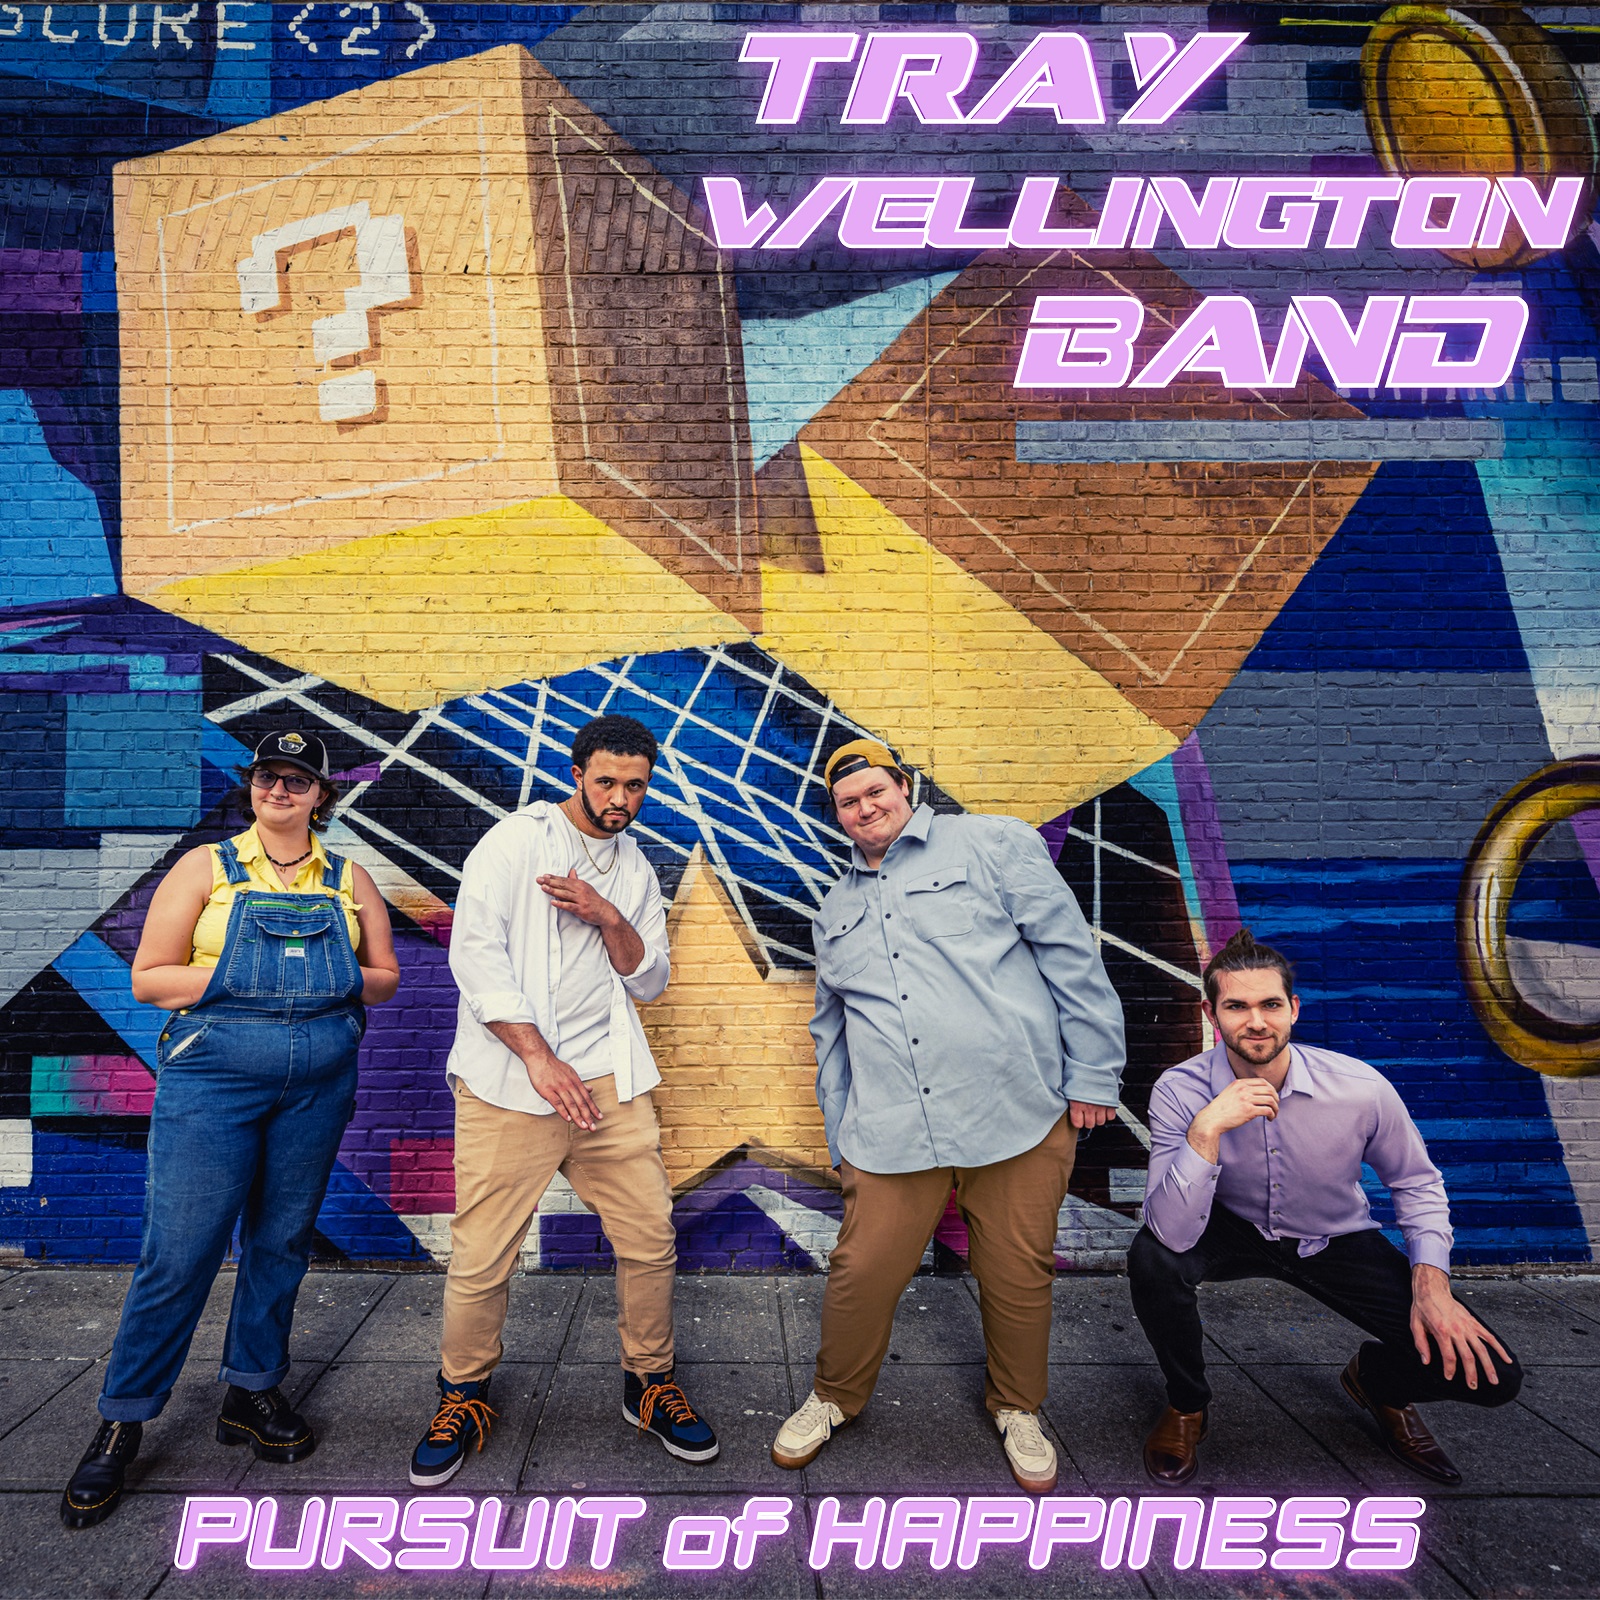 The Tray Wellington Band releases a bold cover of Kid Cudi’s “Pursuit Of Happiness”